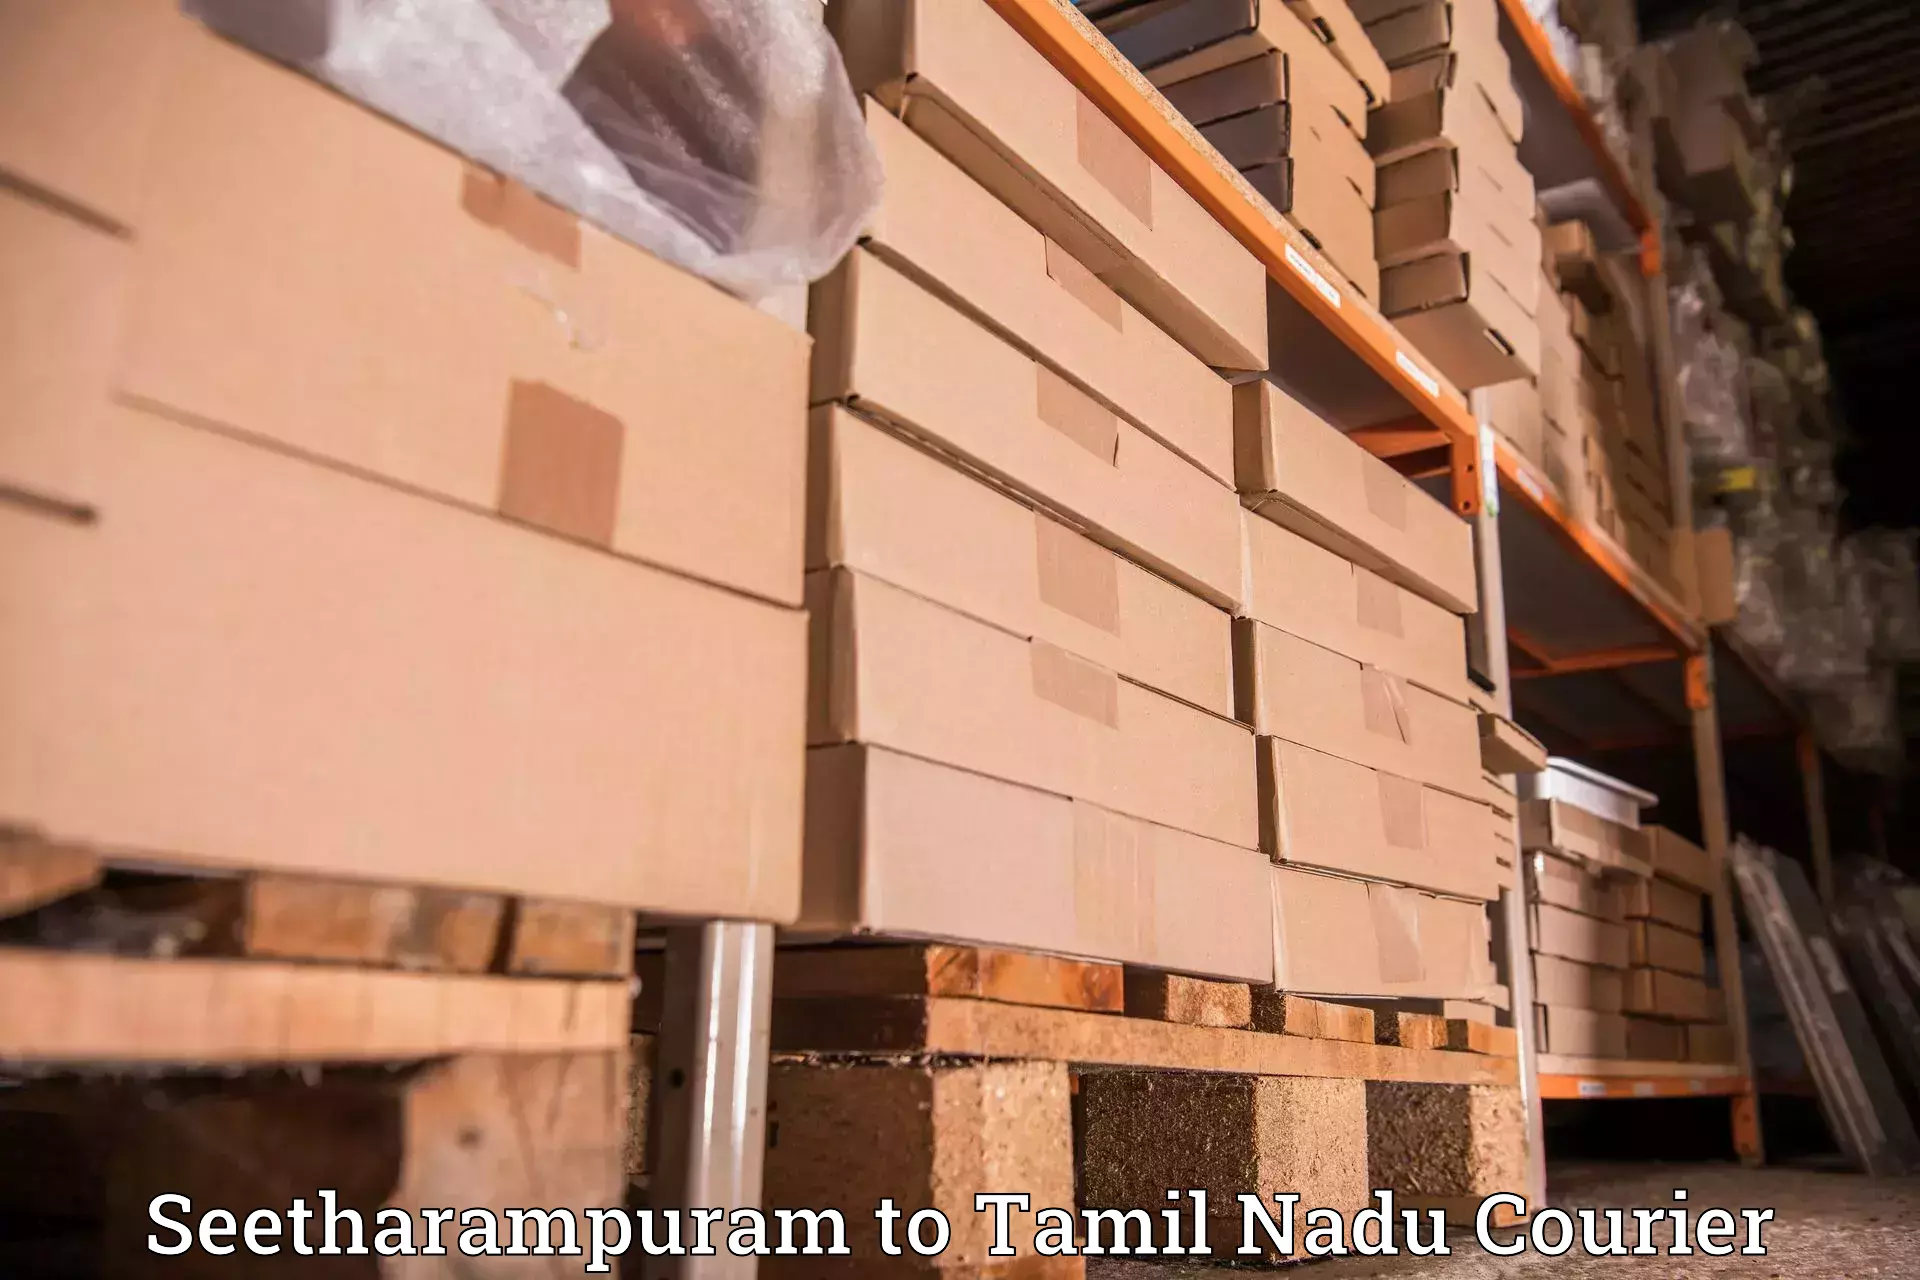 Business shipping needs Seetharampuram to Saveetha Institute of Medical and Technical Sciences Chennai